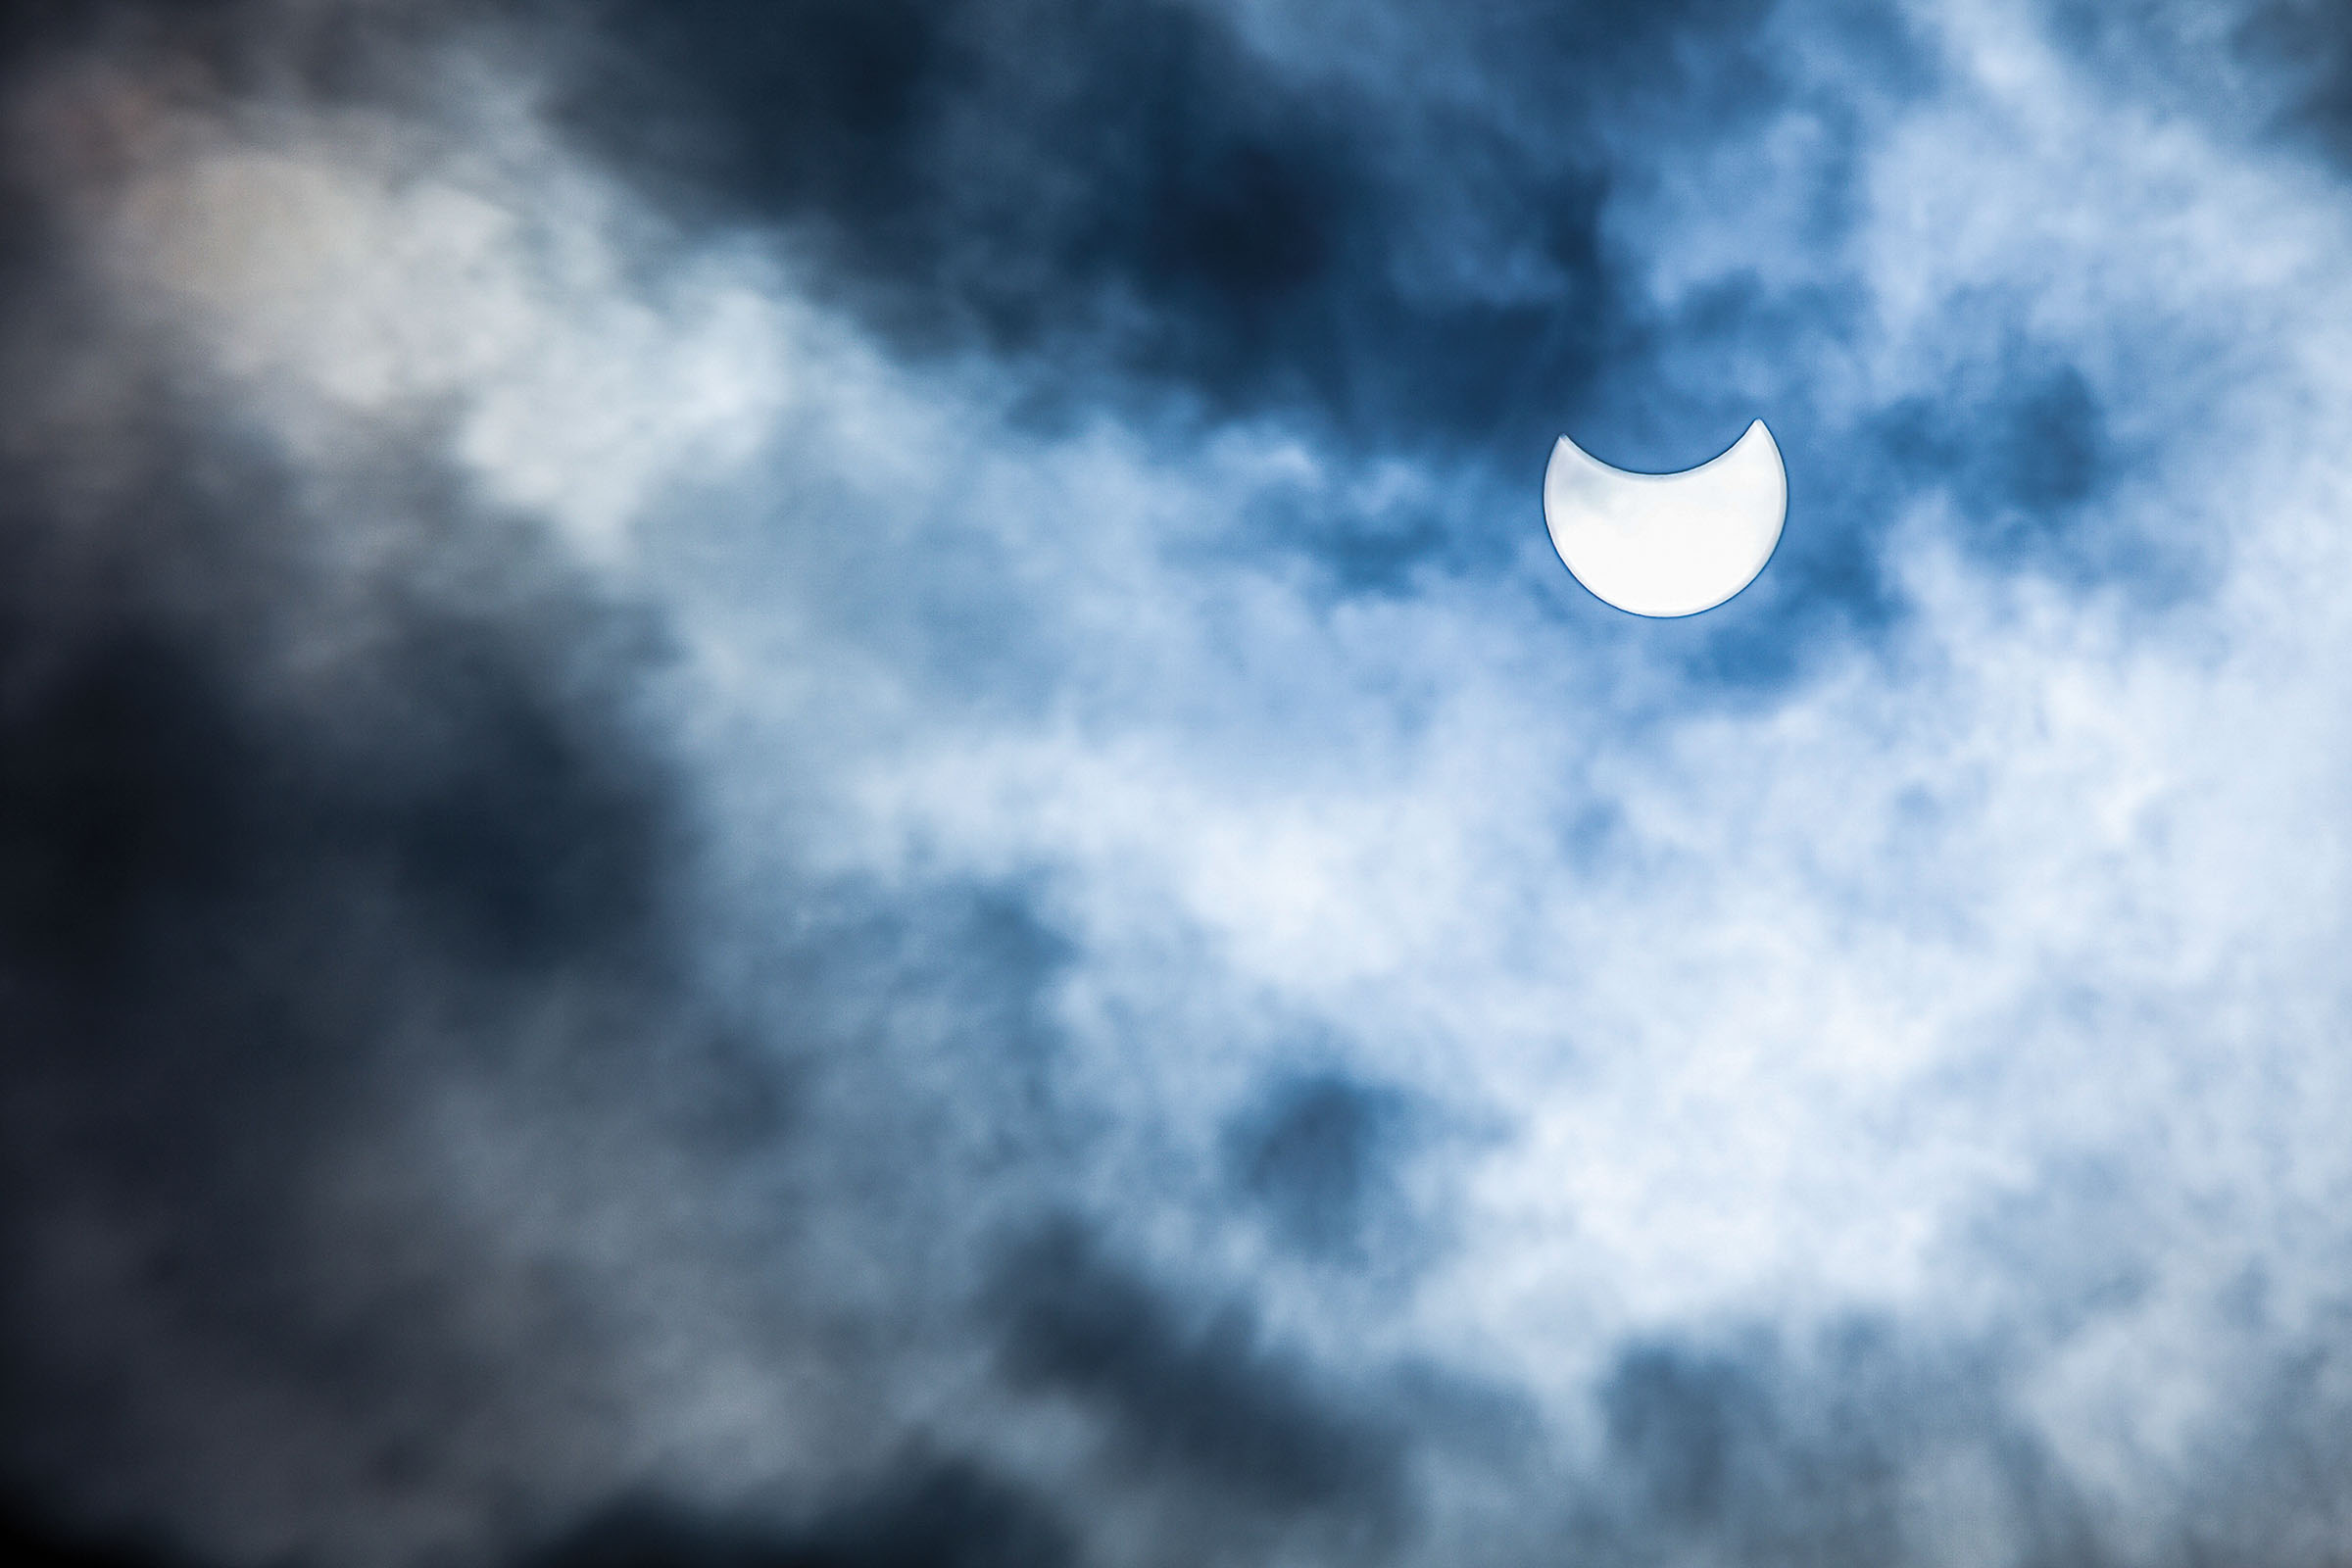 An eclipsed sun in a half-moon shape partially blocked by clouds